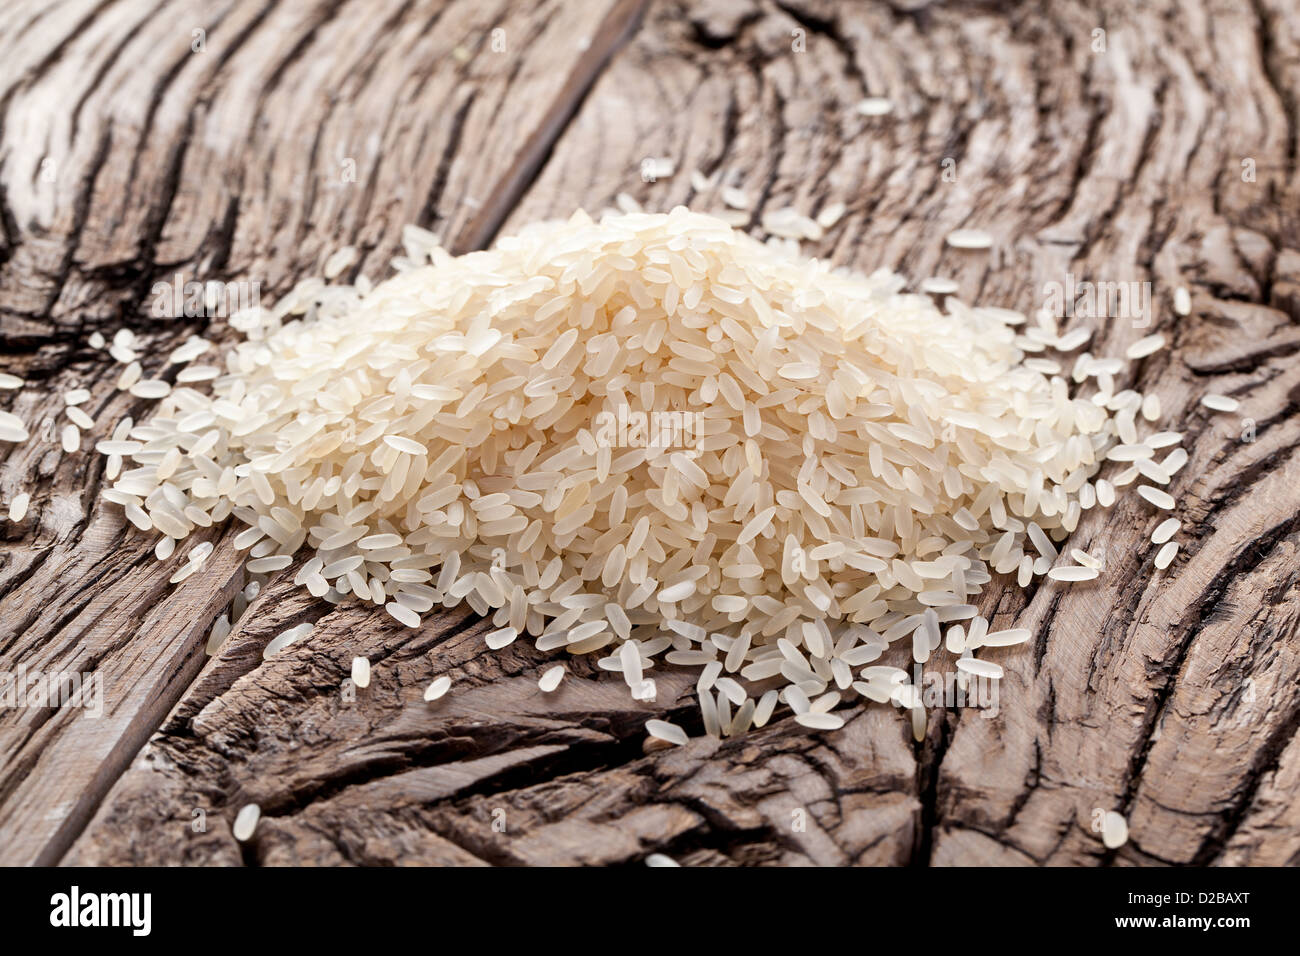 Handful of rice on a wooden table. Stock Photo